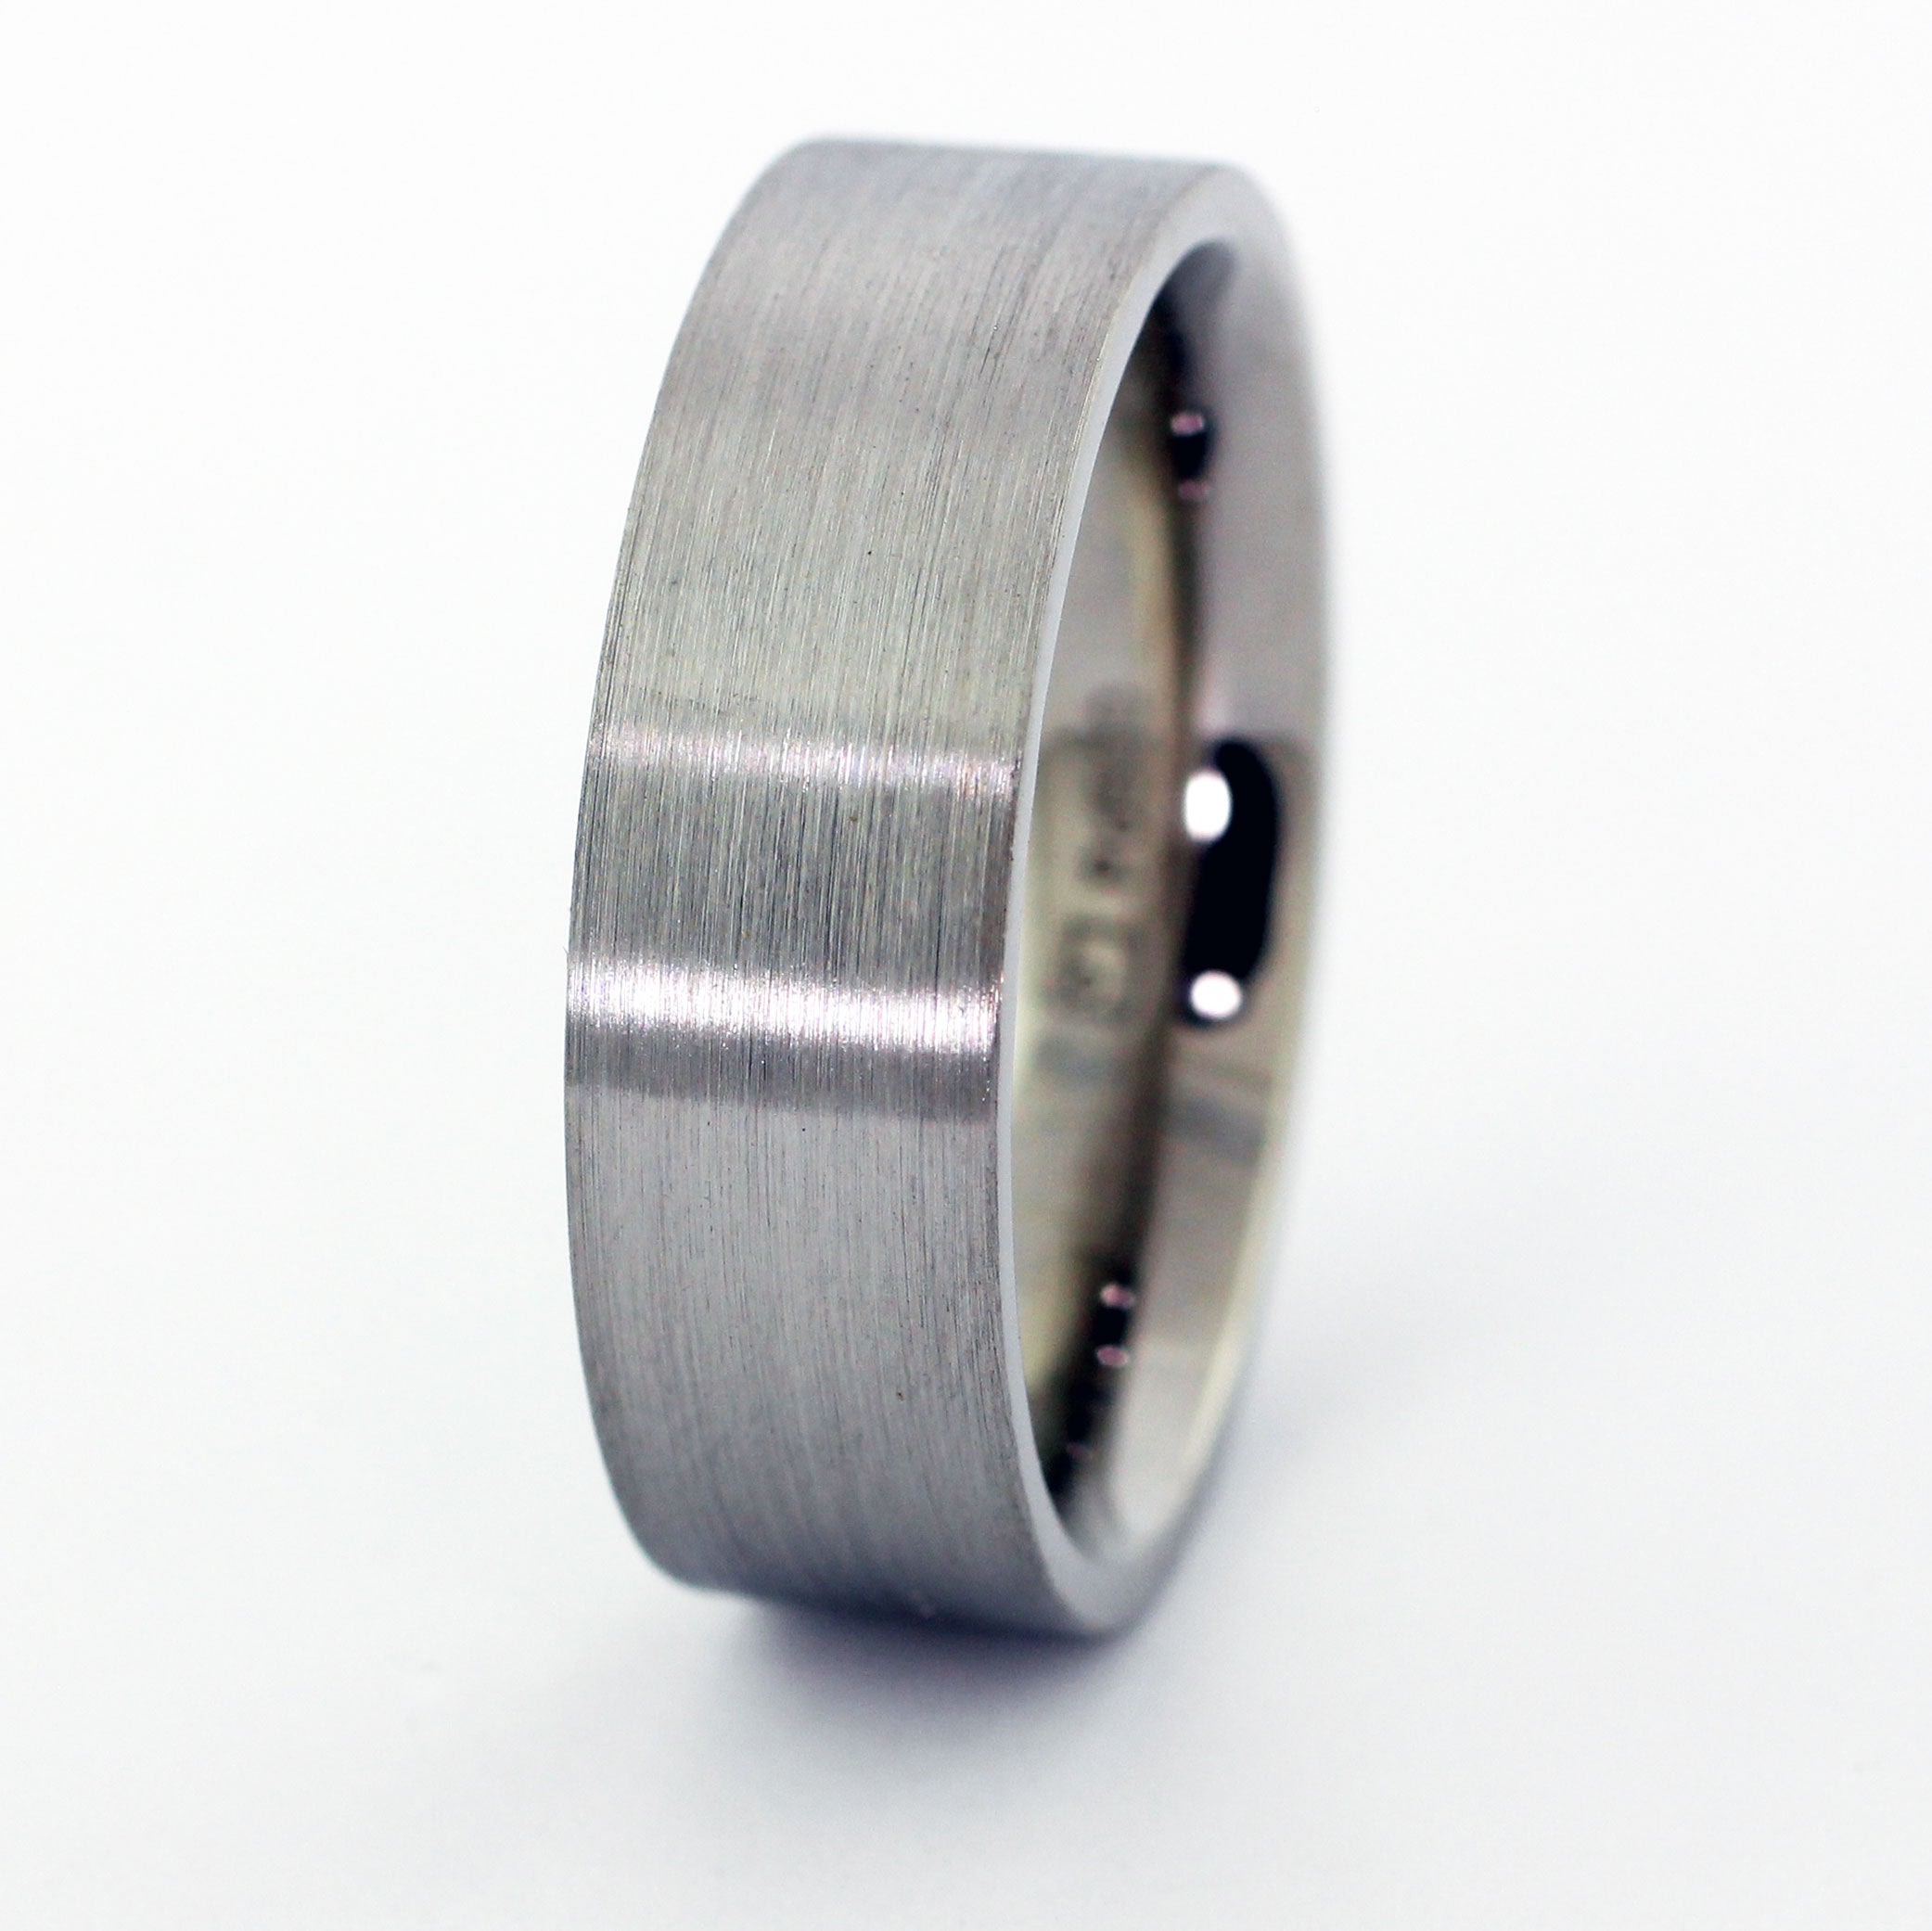 Custom palladium men's wedding band with a modern square top and brushed finish.